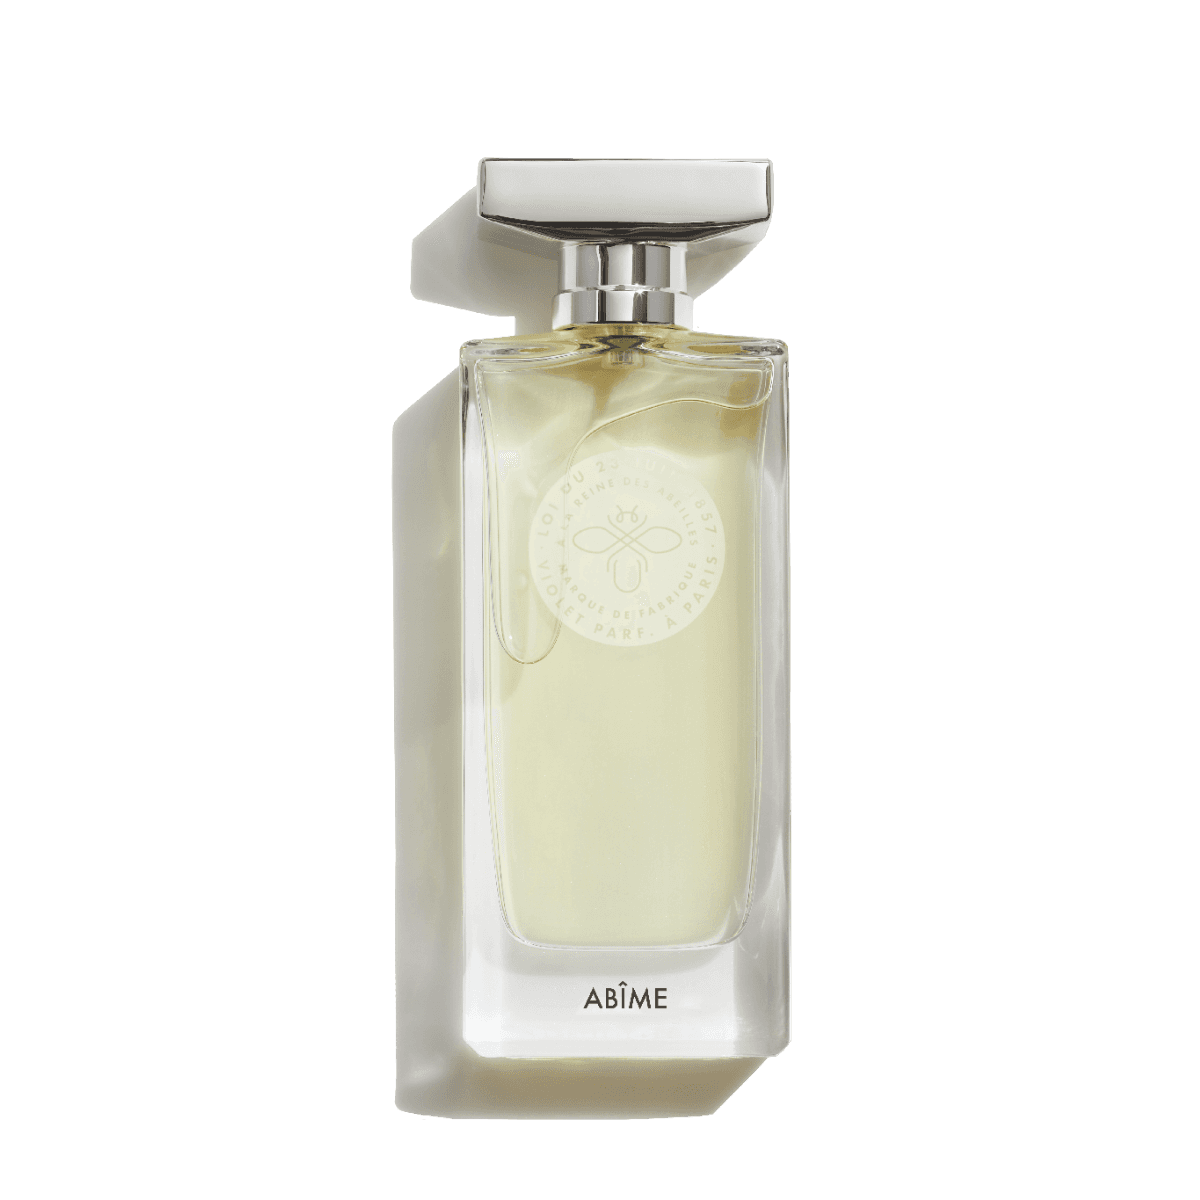 Image of Abime 75 ml by the perfume brand Violet